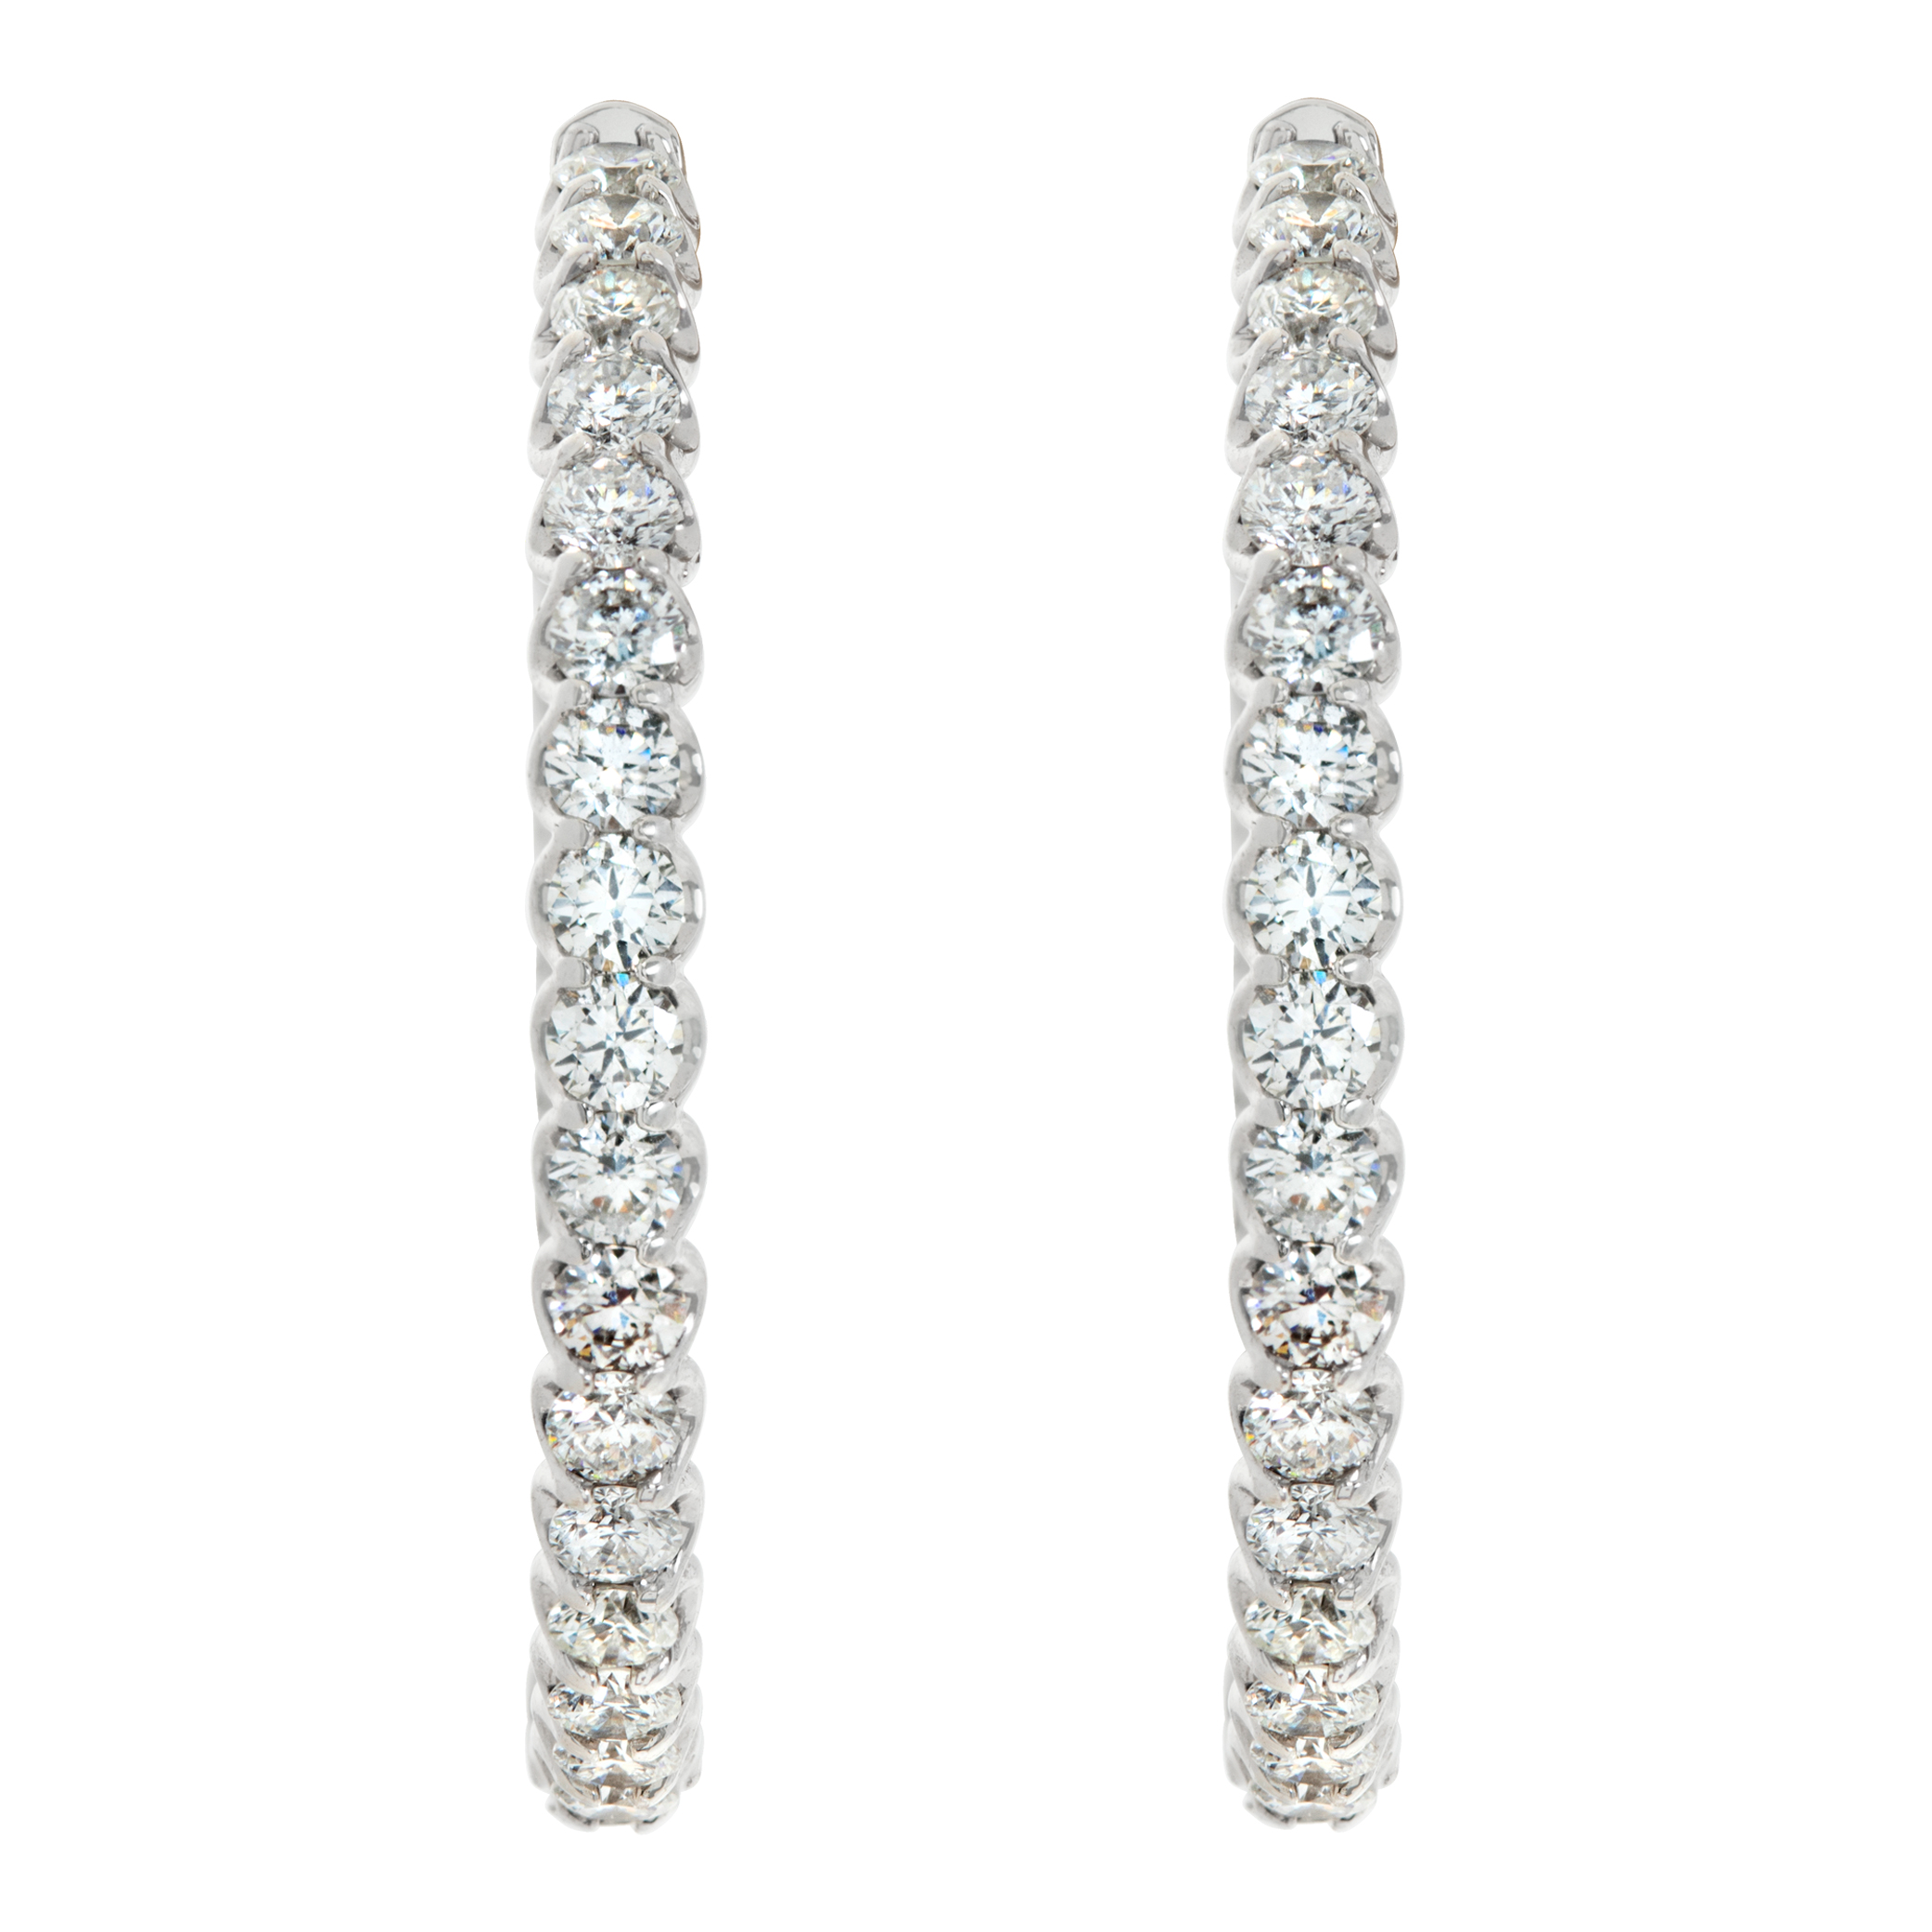 Inside-out medium diamond hoops with 3.96 carats in 14k